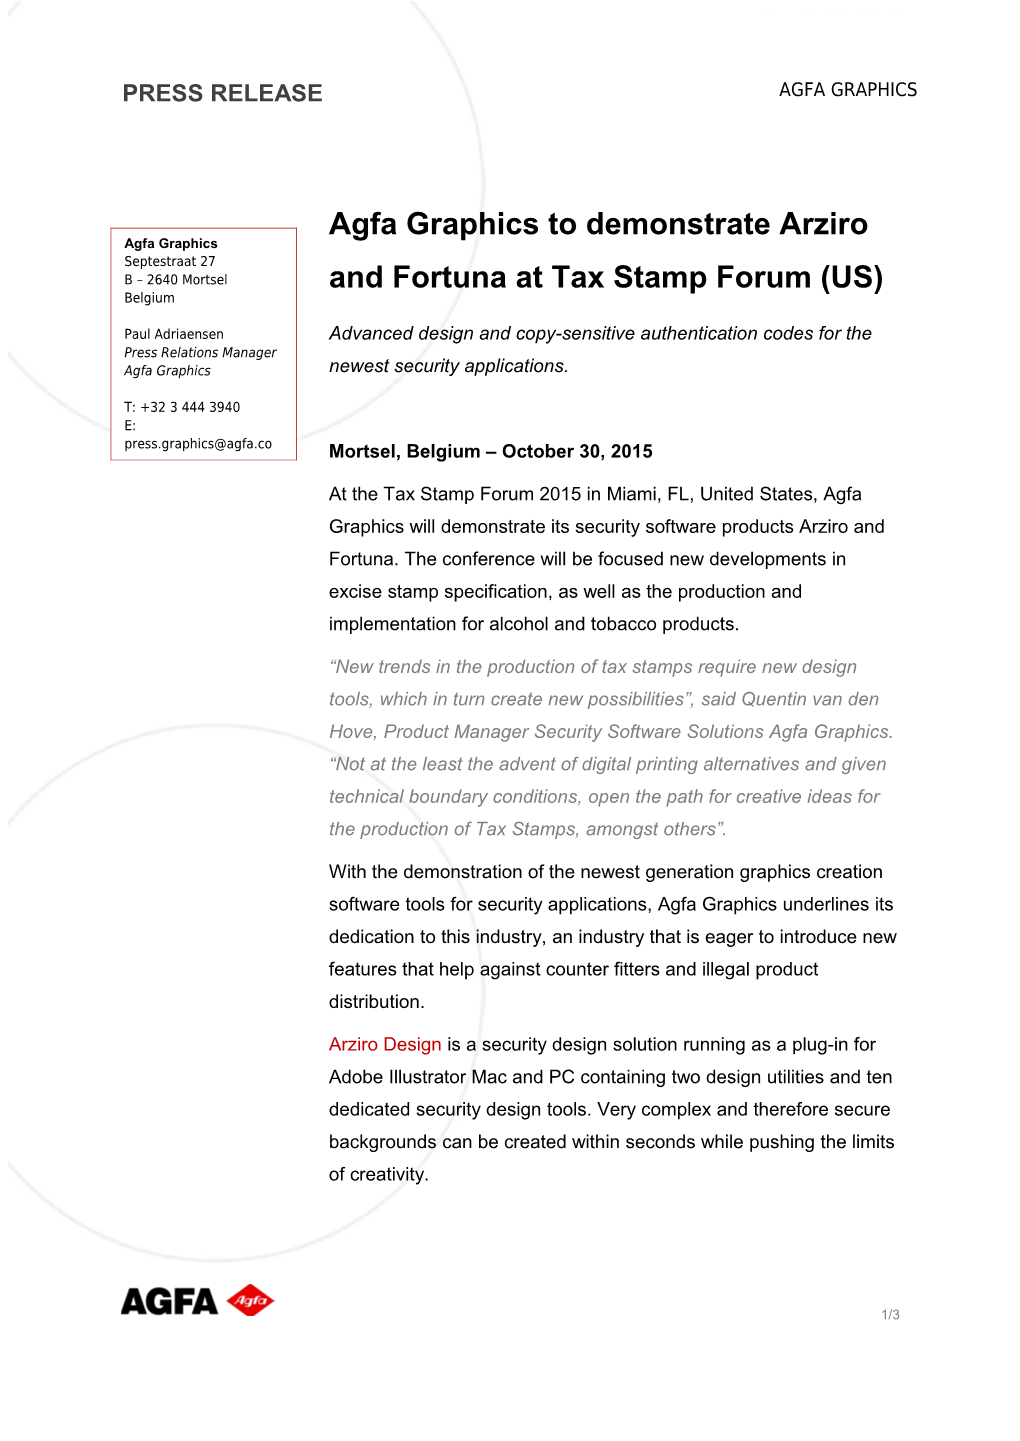 Agfa Graphicsto Demonstrate Arziro and Fortuna at Tax Stamp Forum (US)